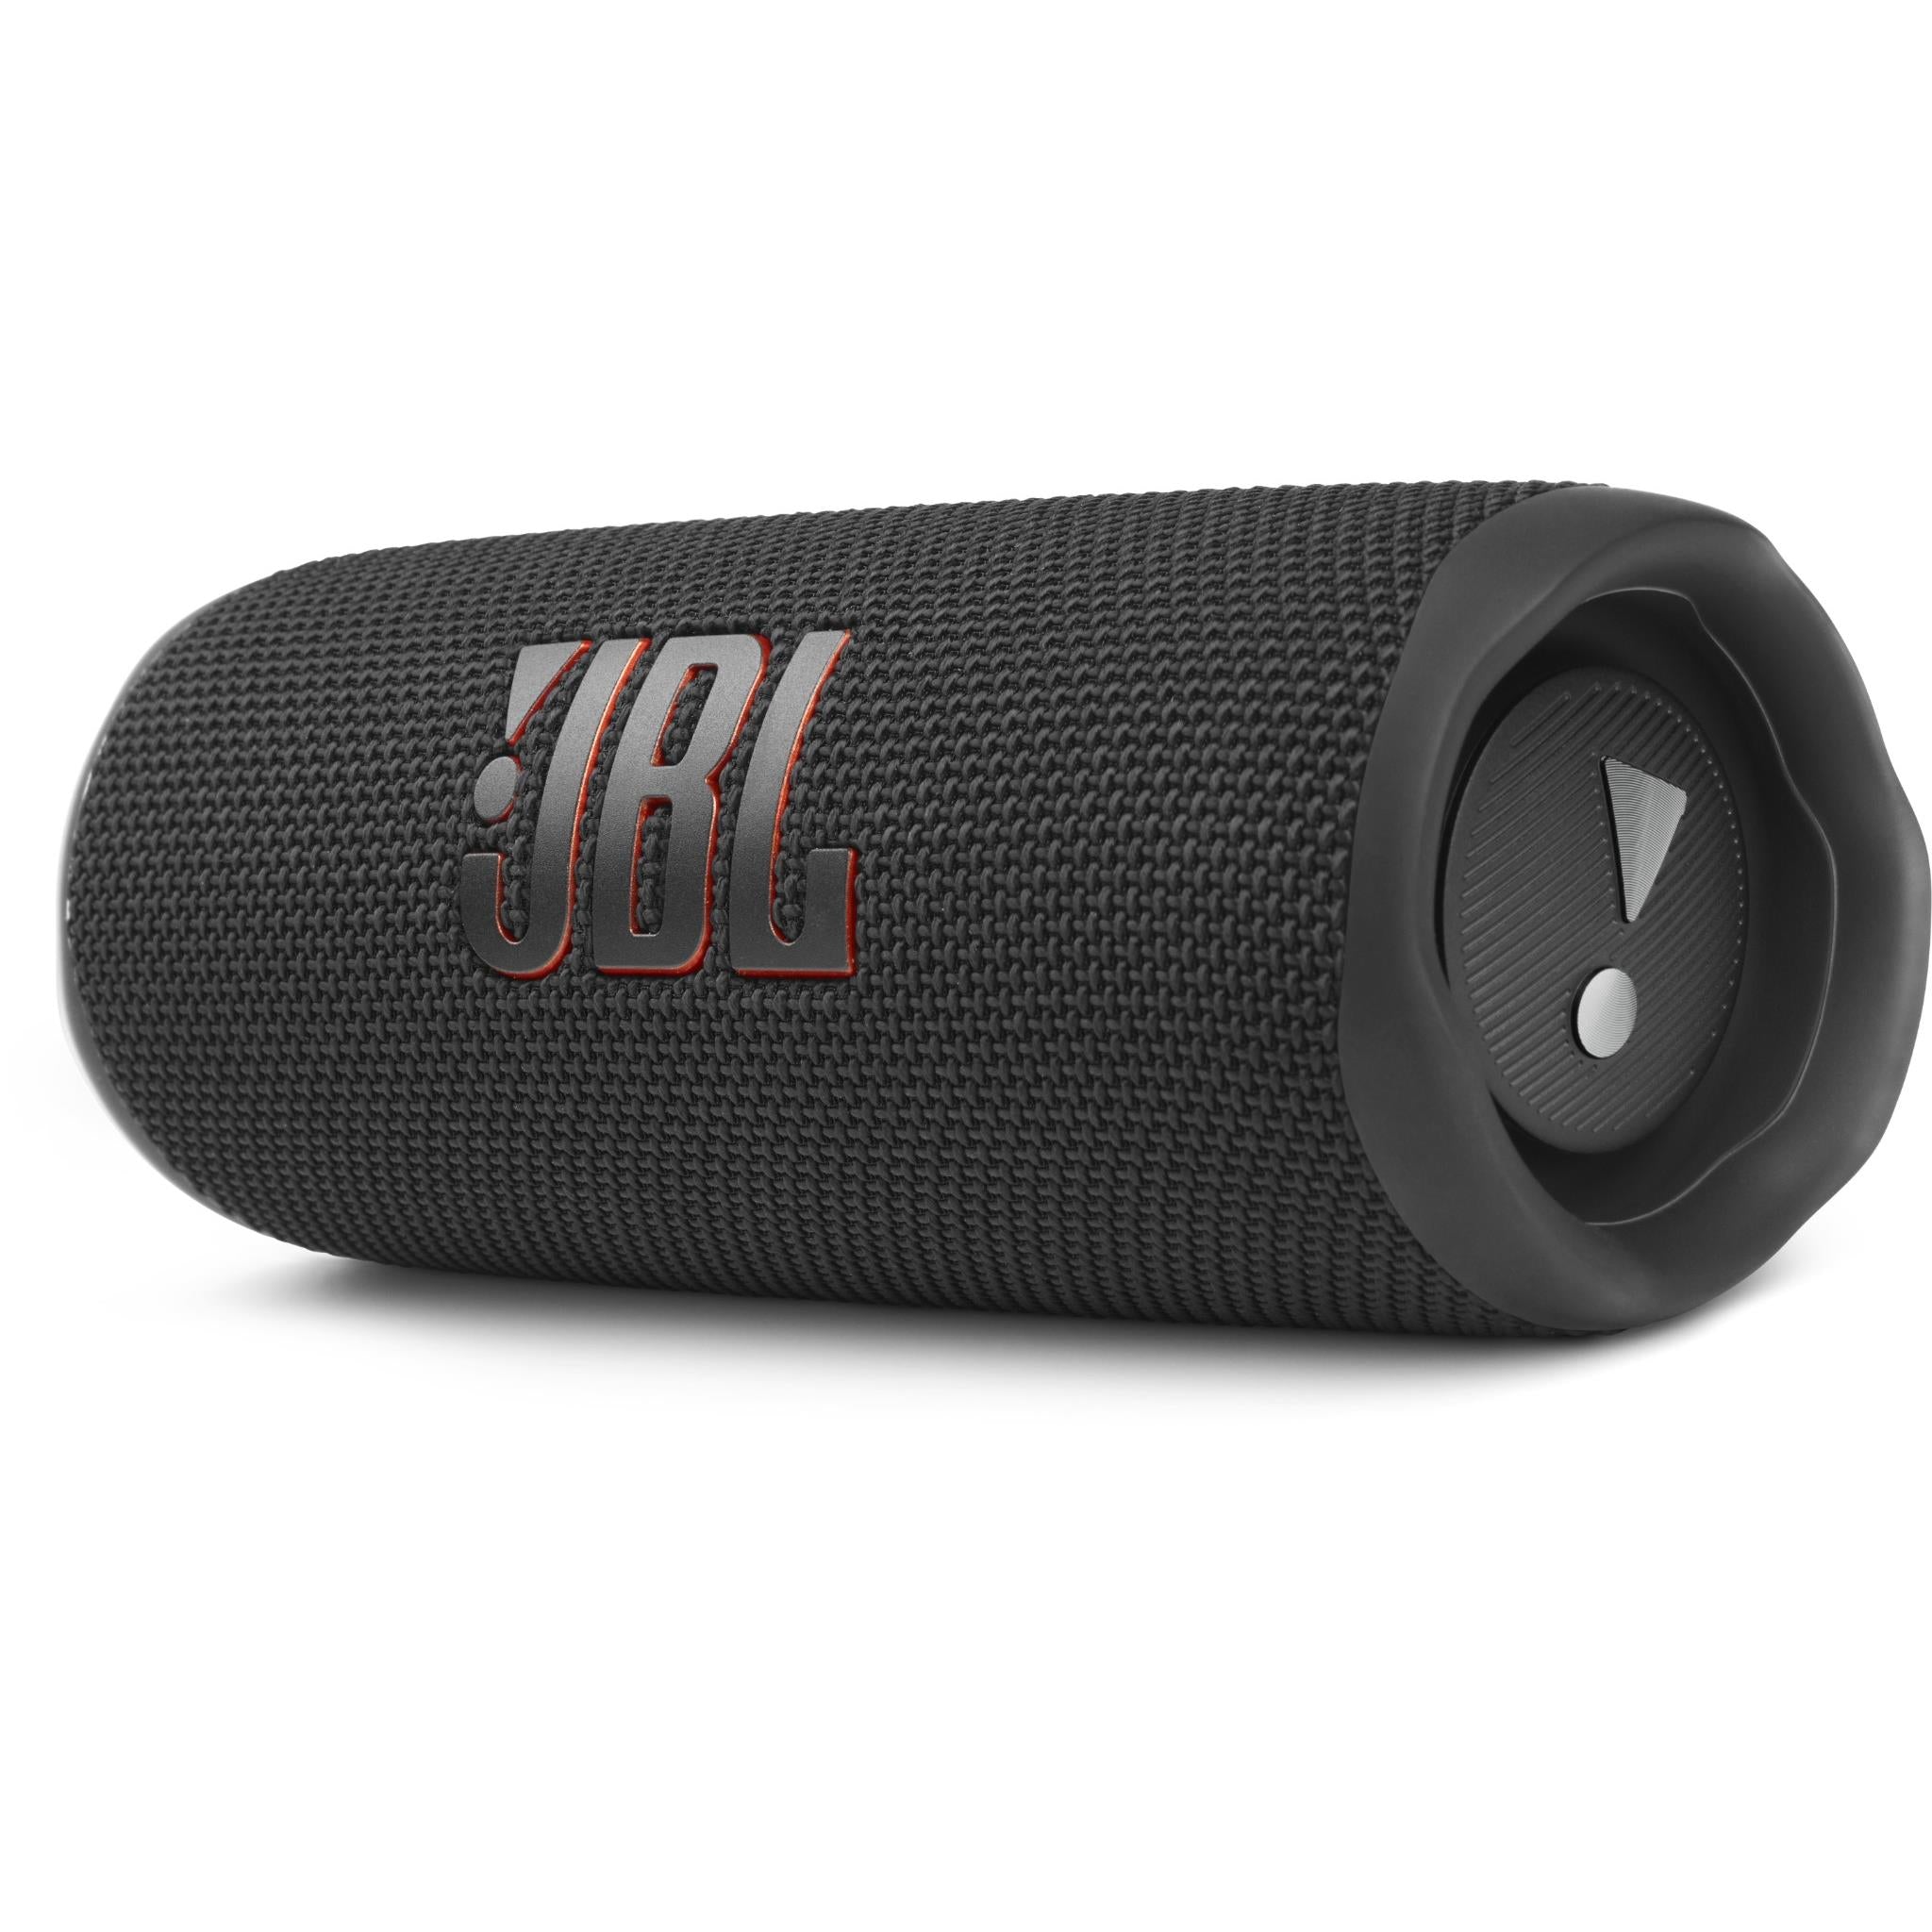 The JBL Charge 4 Bluetooth speaker is on sale for $91